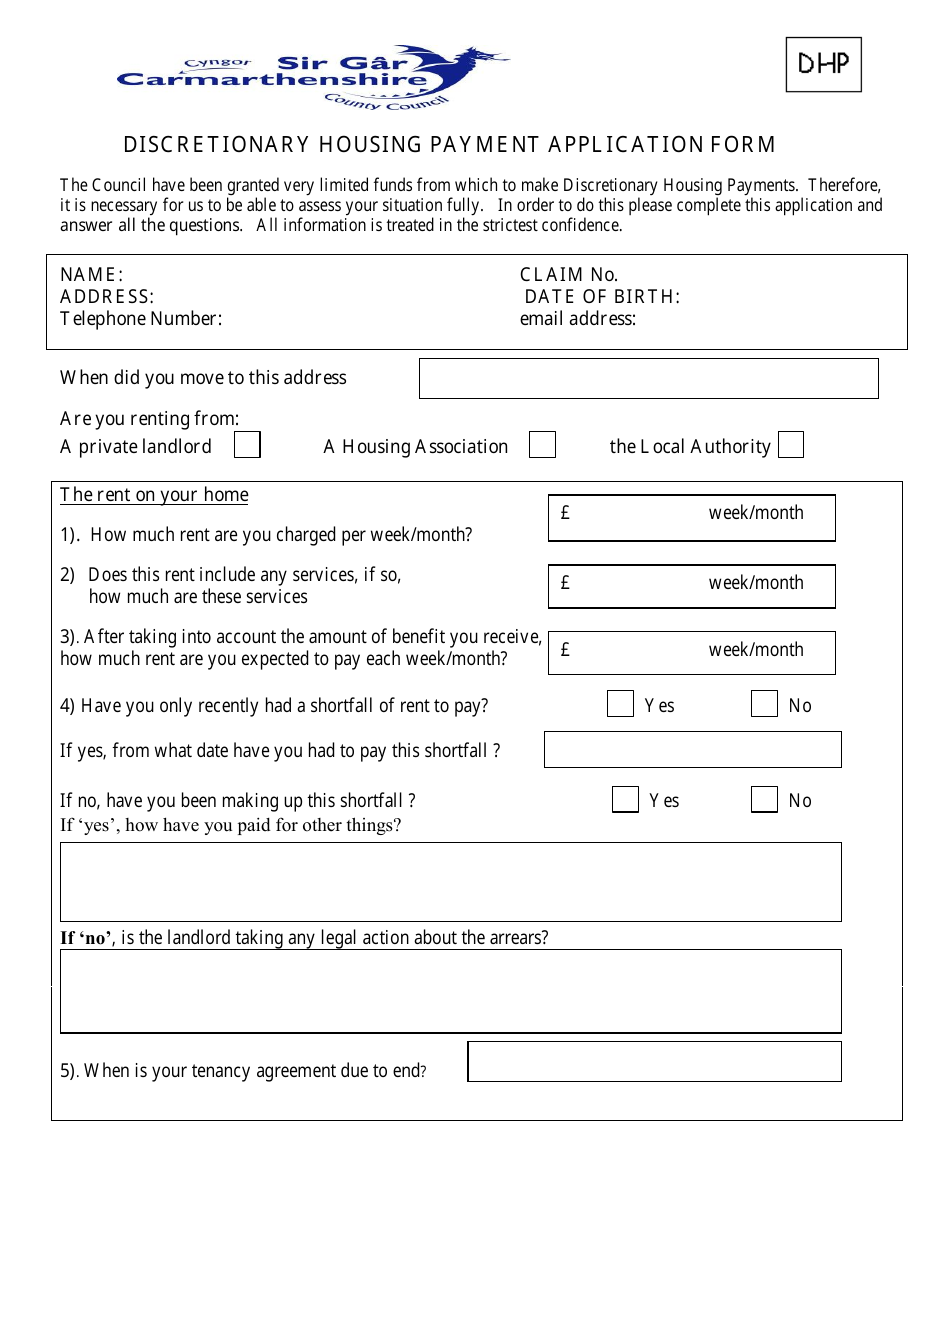 Discretionary Housing Payment Application Form - Carmarthenshire, United Kingdom, Page 1